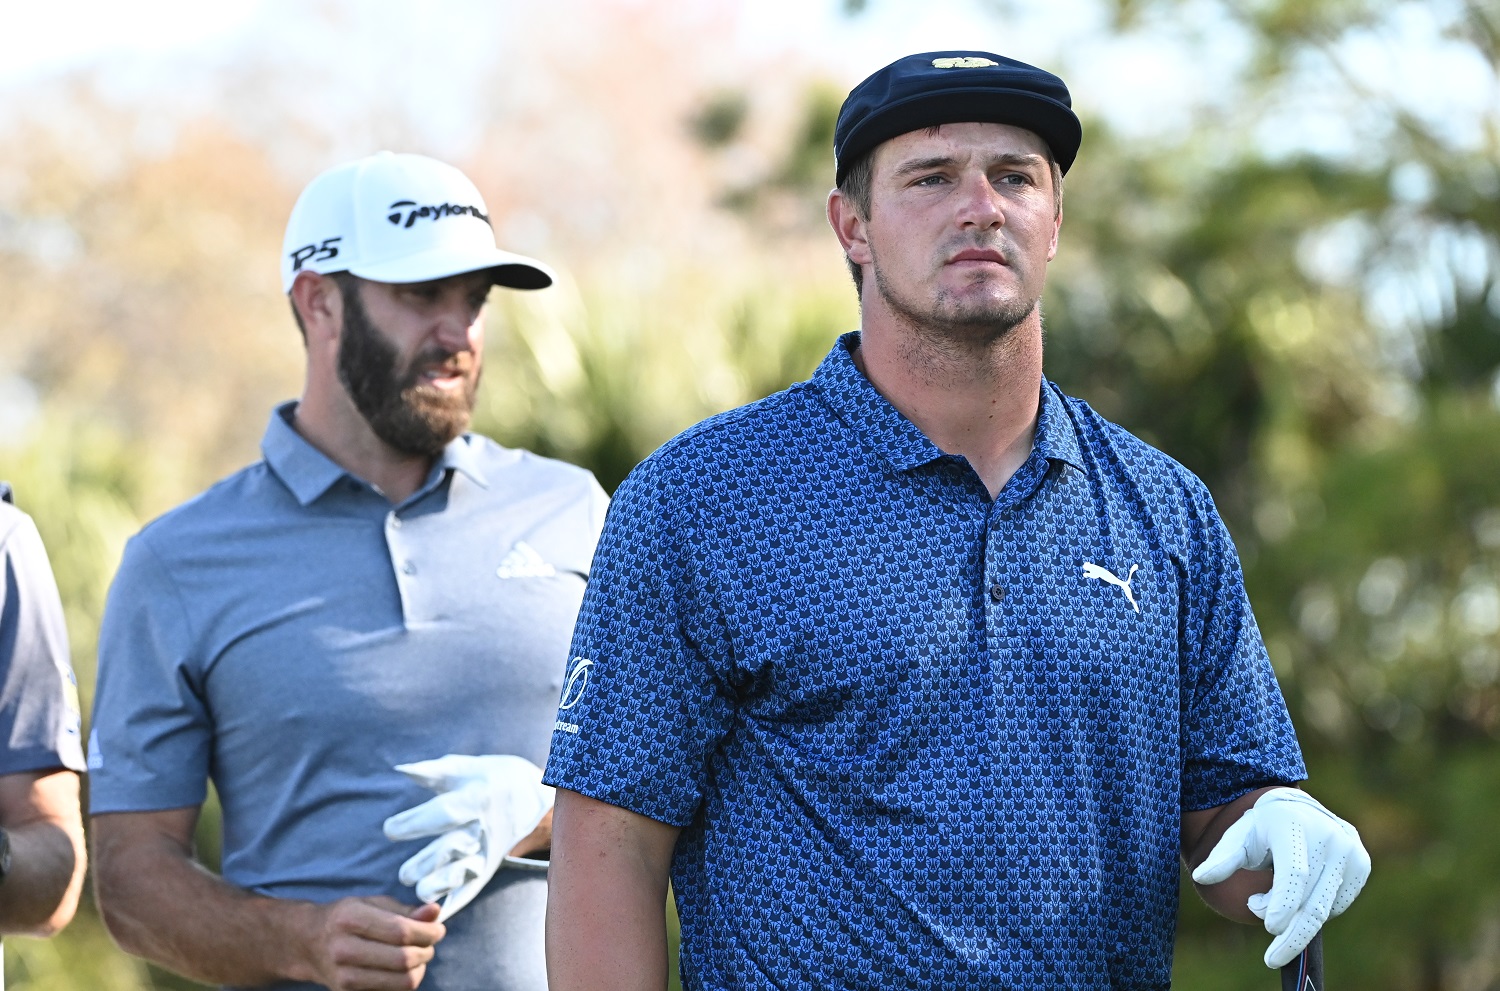 Dustin Johnson and Bryson DeChambeau walk down a fairway during the second round of The Players Championship at TPC Sawgrass on March 12, 2021, in Ponte Vedra Beach, Florida.